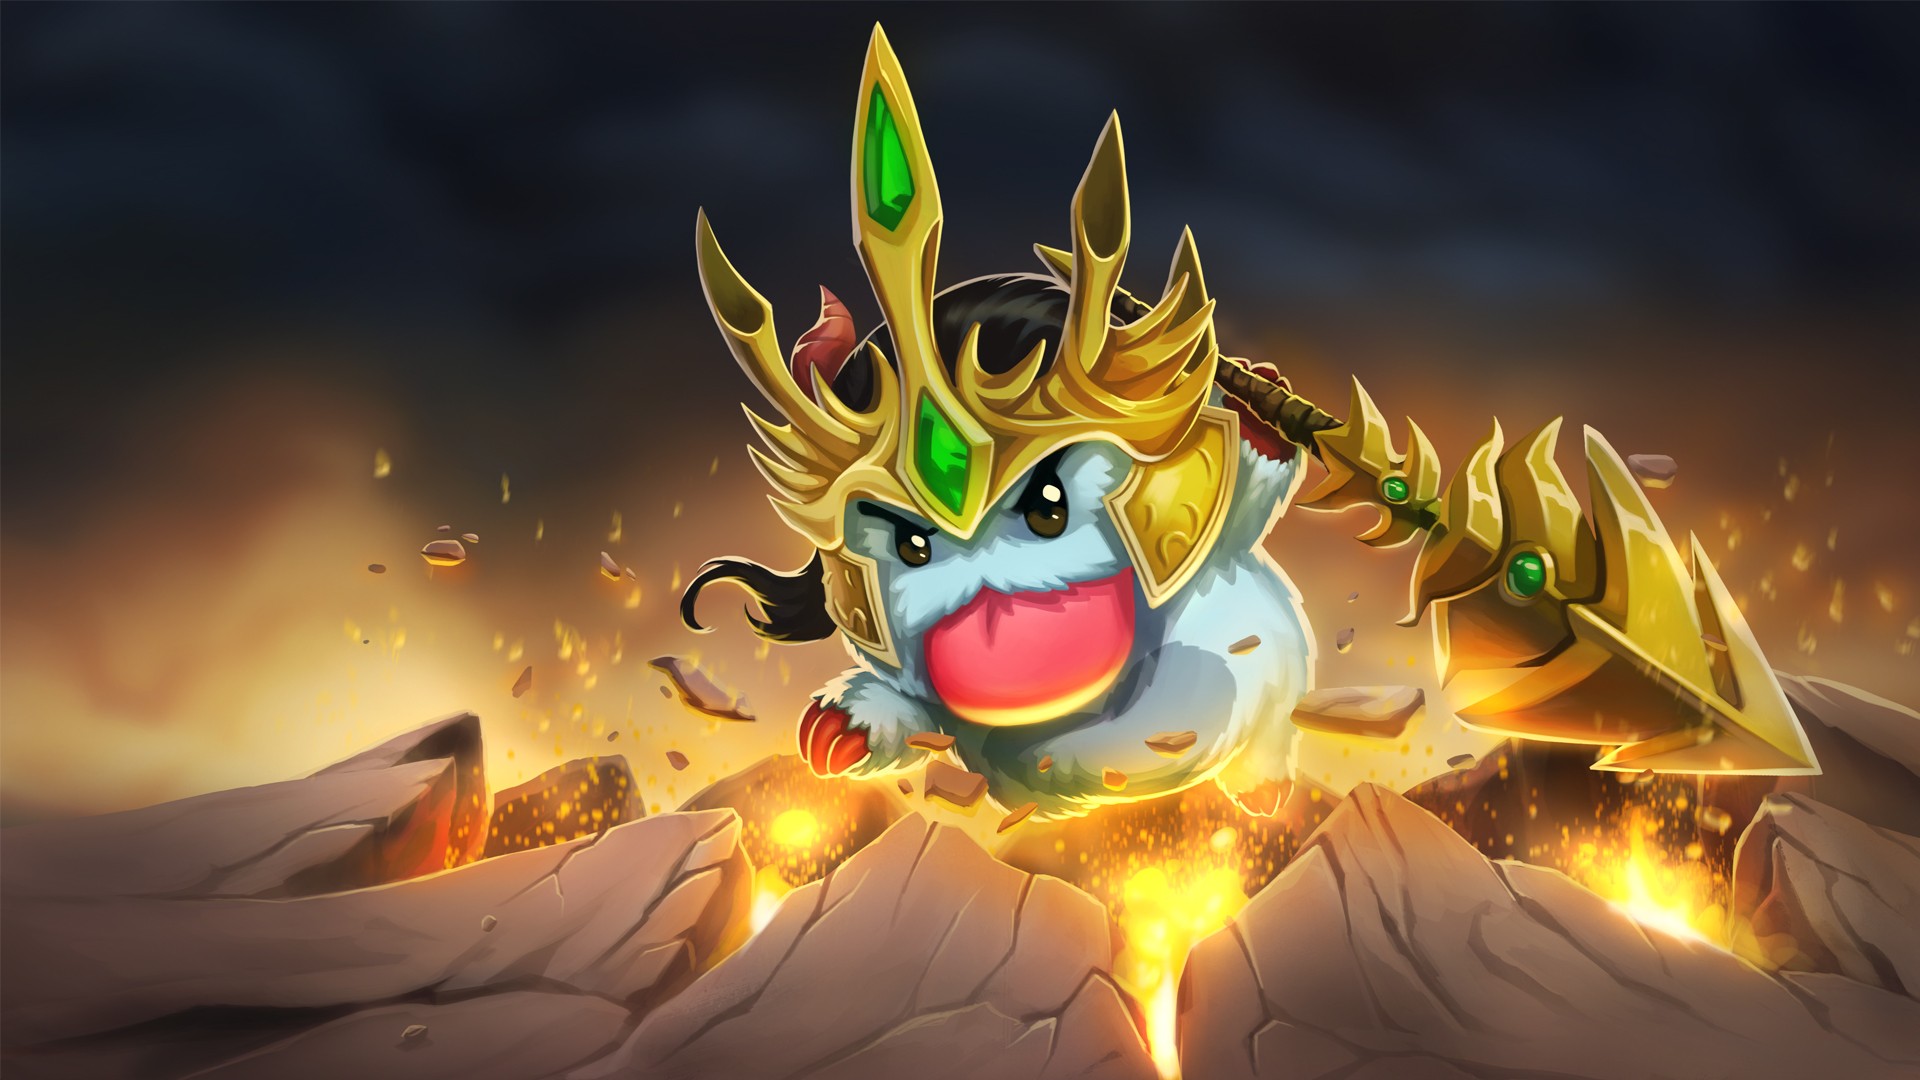 General 1920x1080 League of Legends video game art Jarvan IV (League of Legends) Poro (League of Legends) PC gaming video game characters